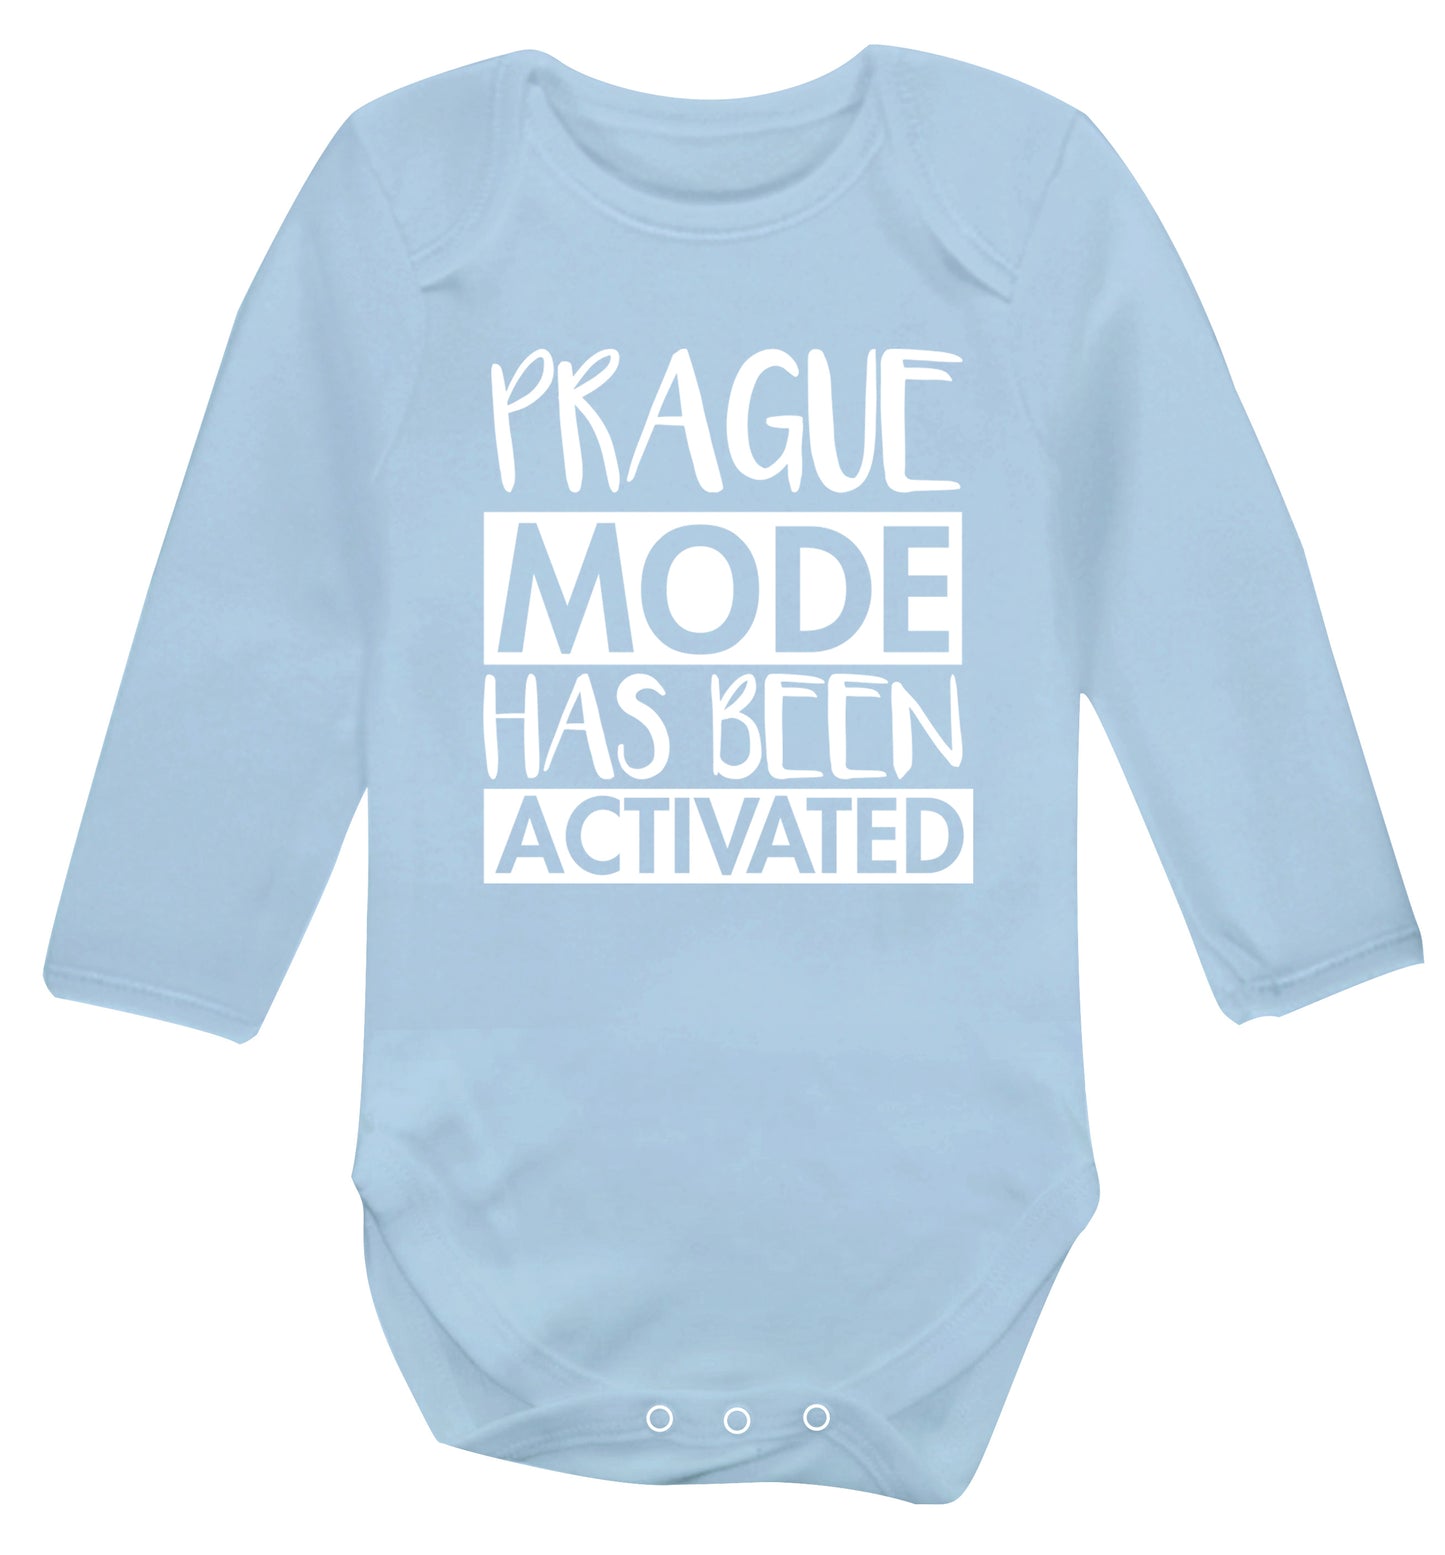 Prague mode has been activated Baby Vest long sleeved pale blue 6-12 months